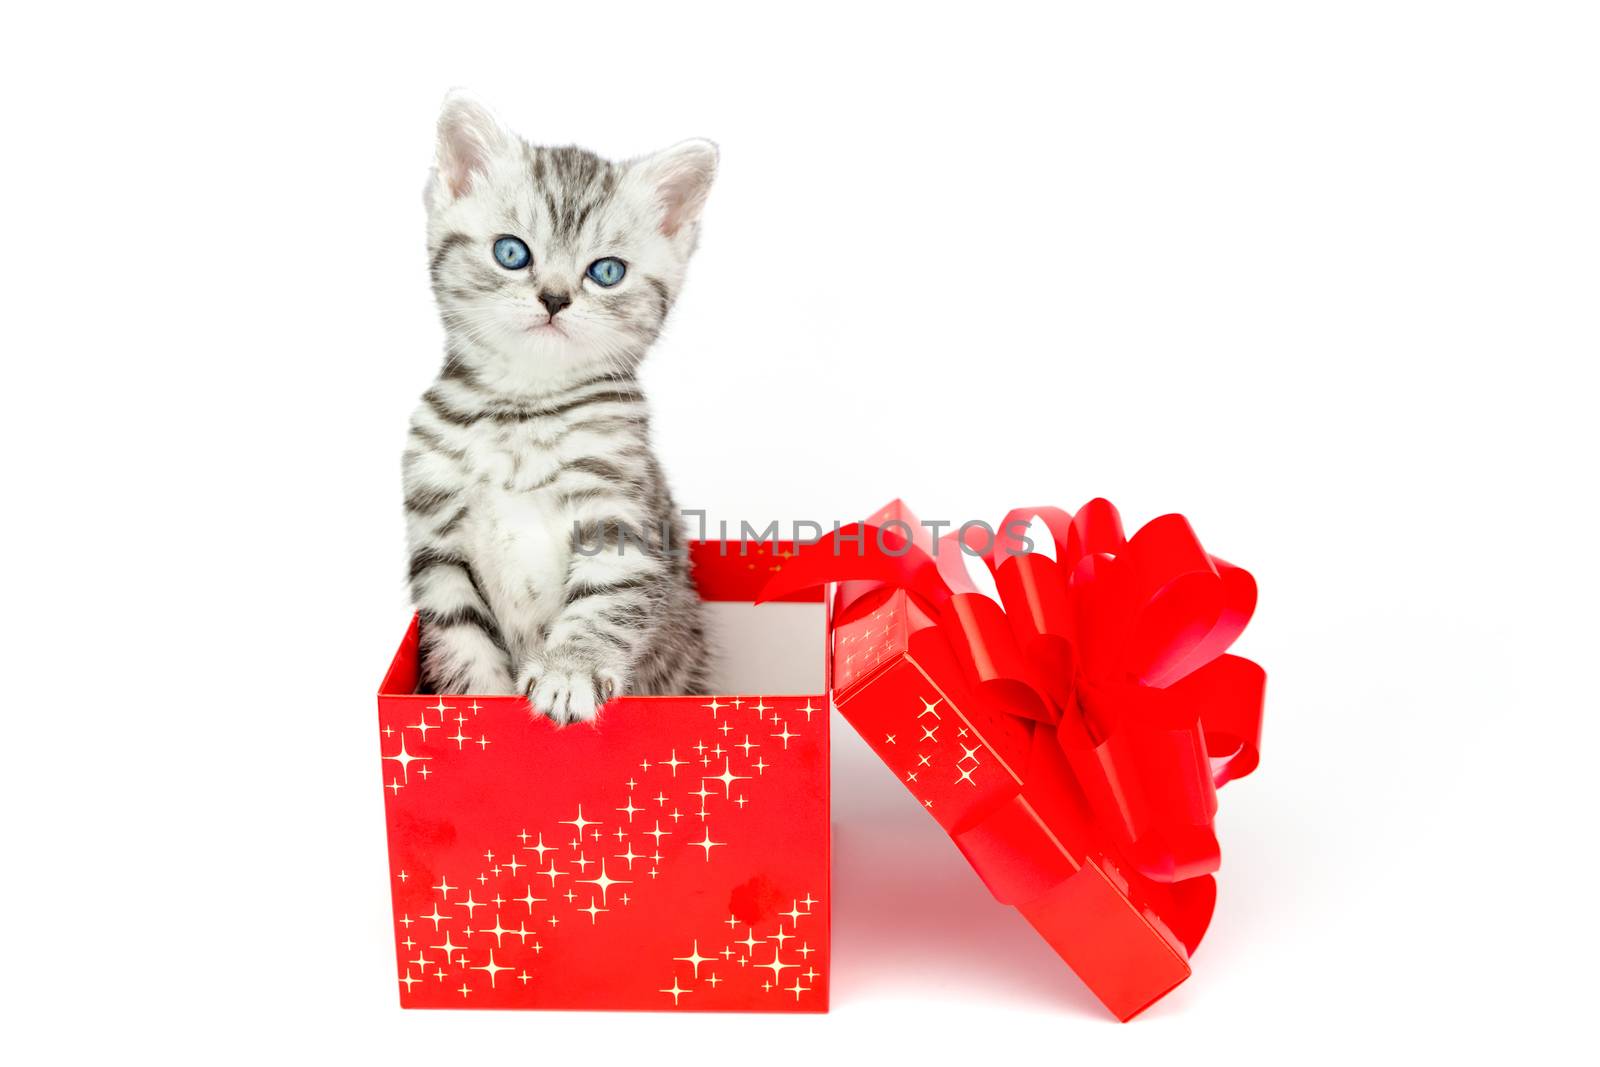 Young silver tabby cat standing in red box with stars isolated on white background